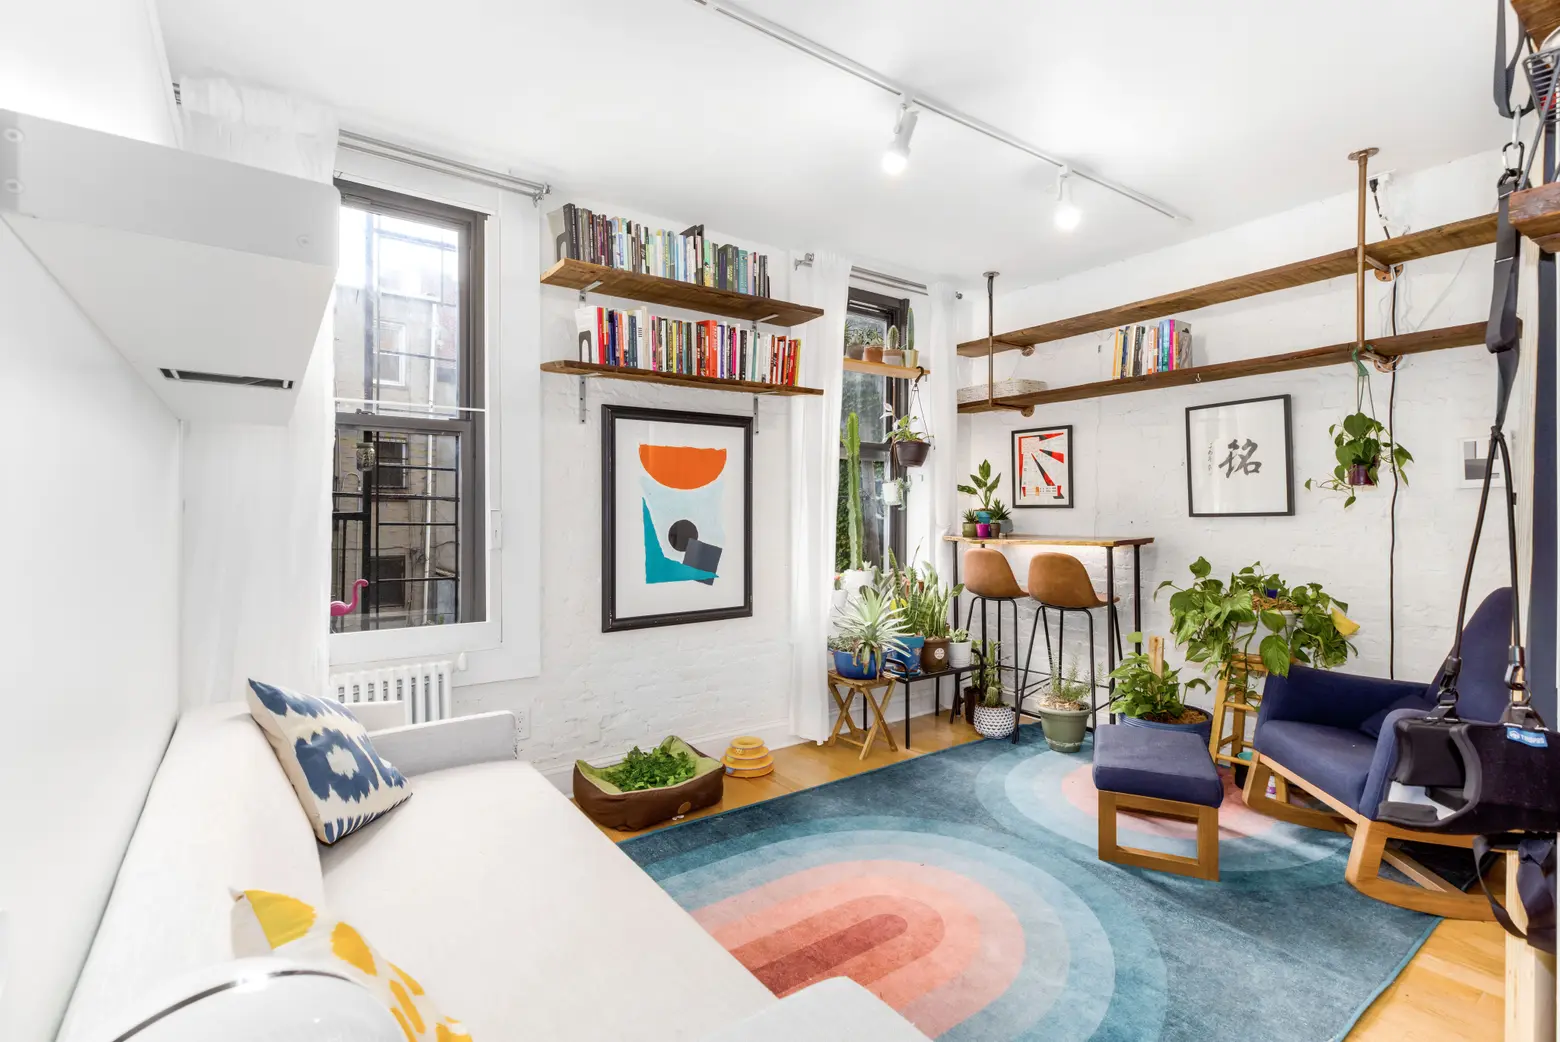 Plants and pops of color make this $369K Williamsburg one-bedroom a happy home